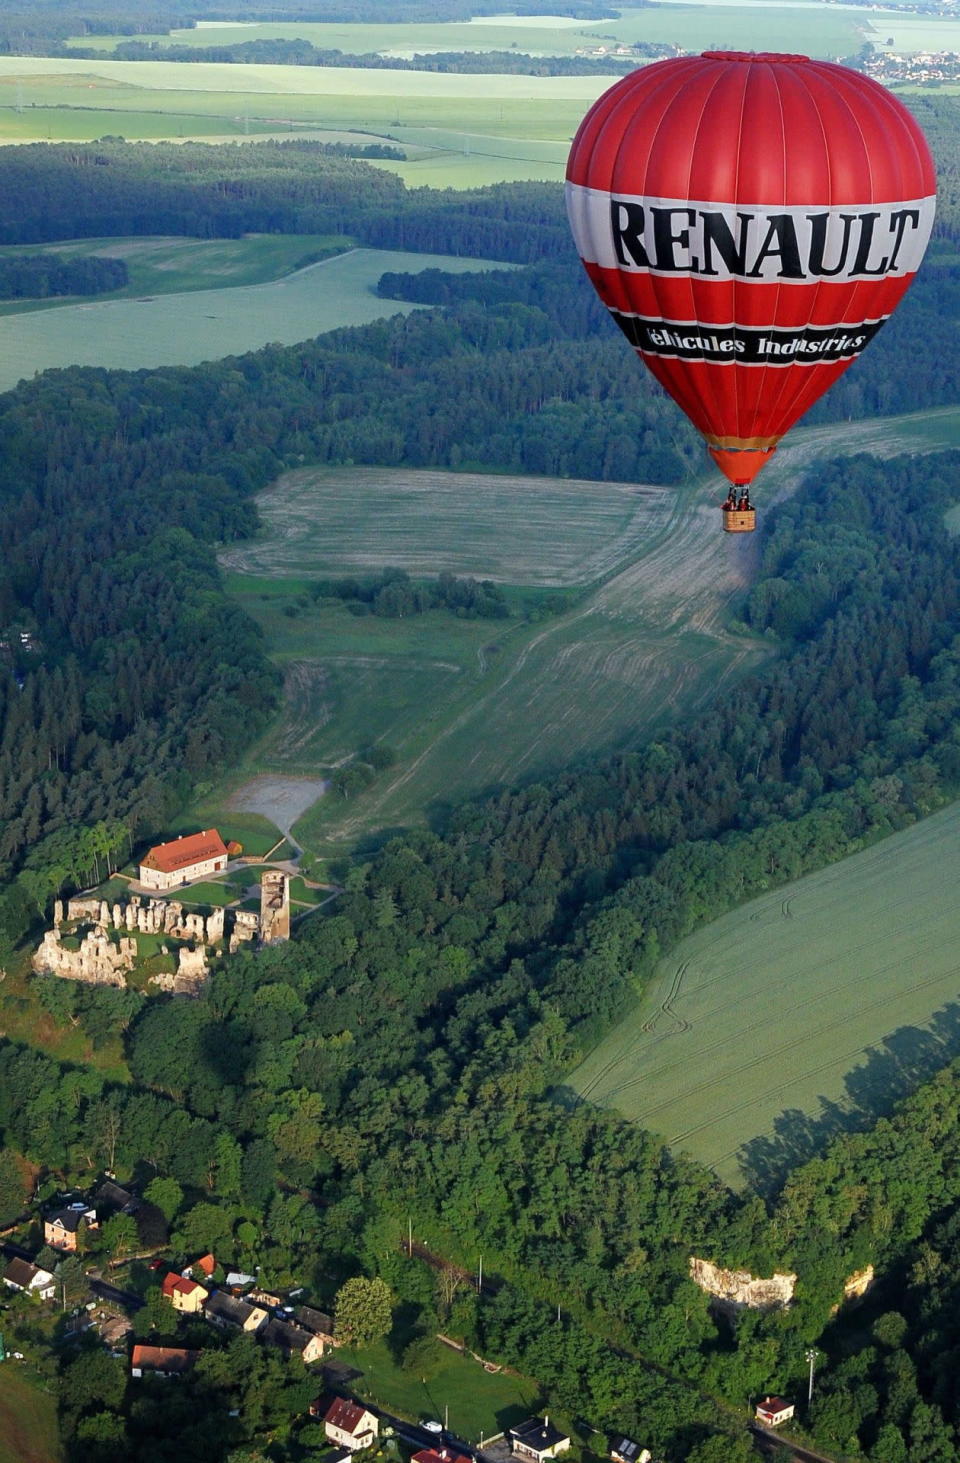 A hot air balloon hovers over the ruins of Zviretice Castle near Bakov nad Jizerou city in the Czech Republic - July 7, 2016 (Rex)